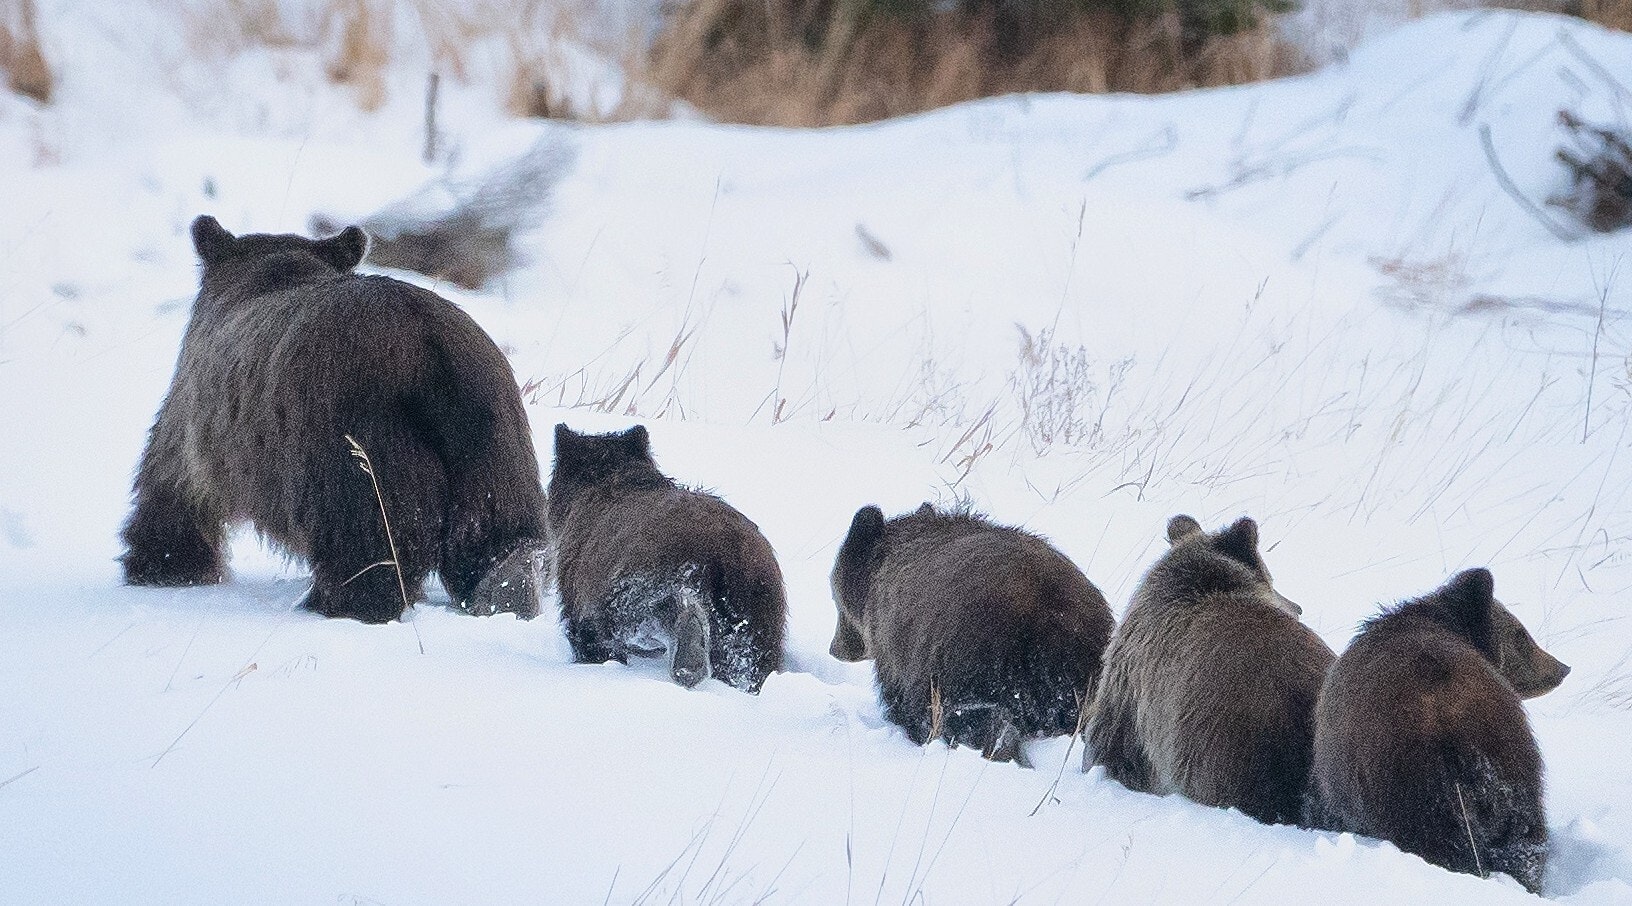 Grizzly 399 and her young brood of four cubs in 2020.